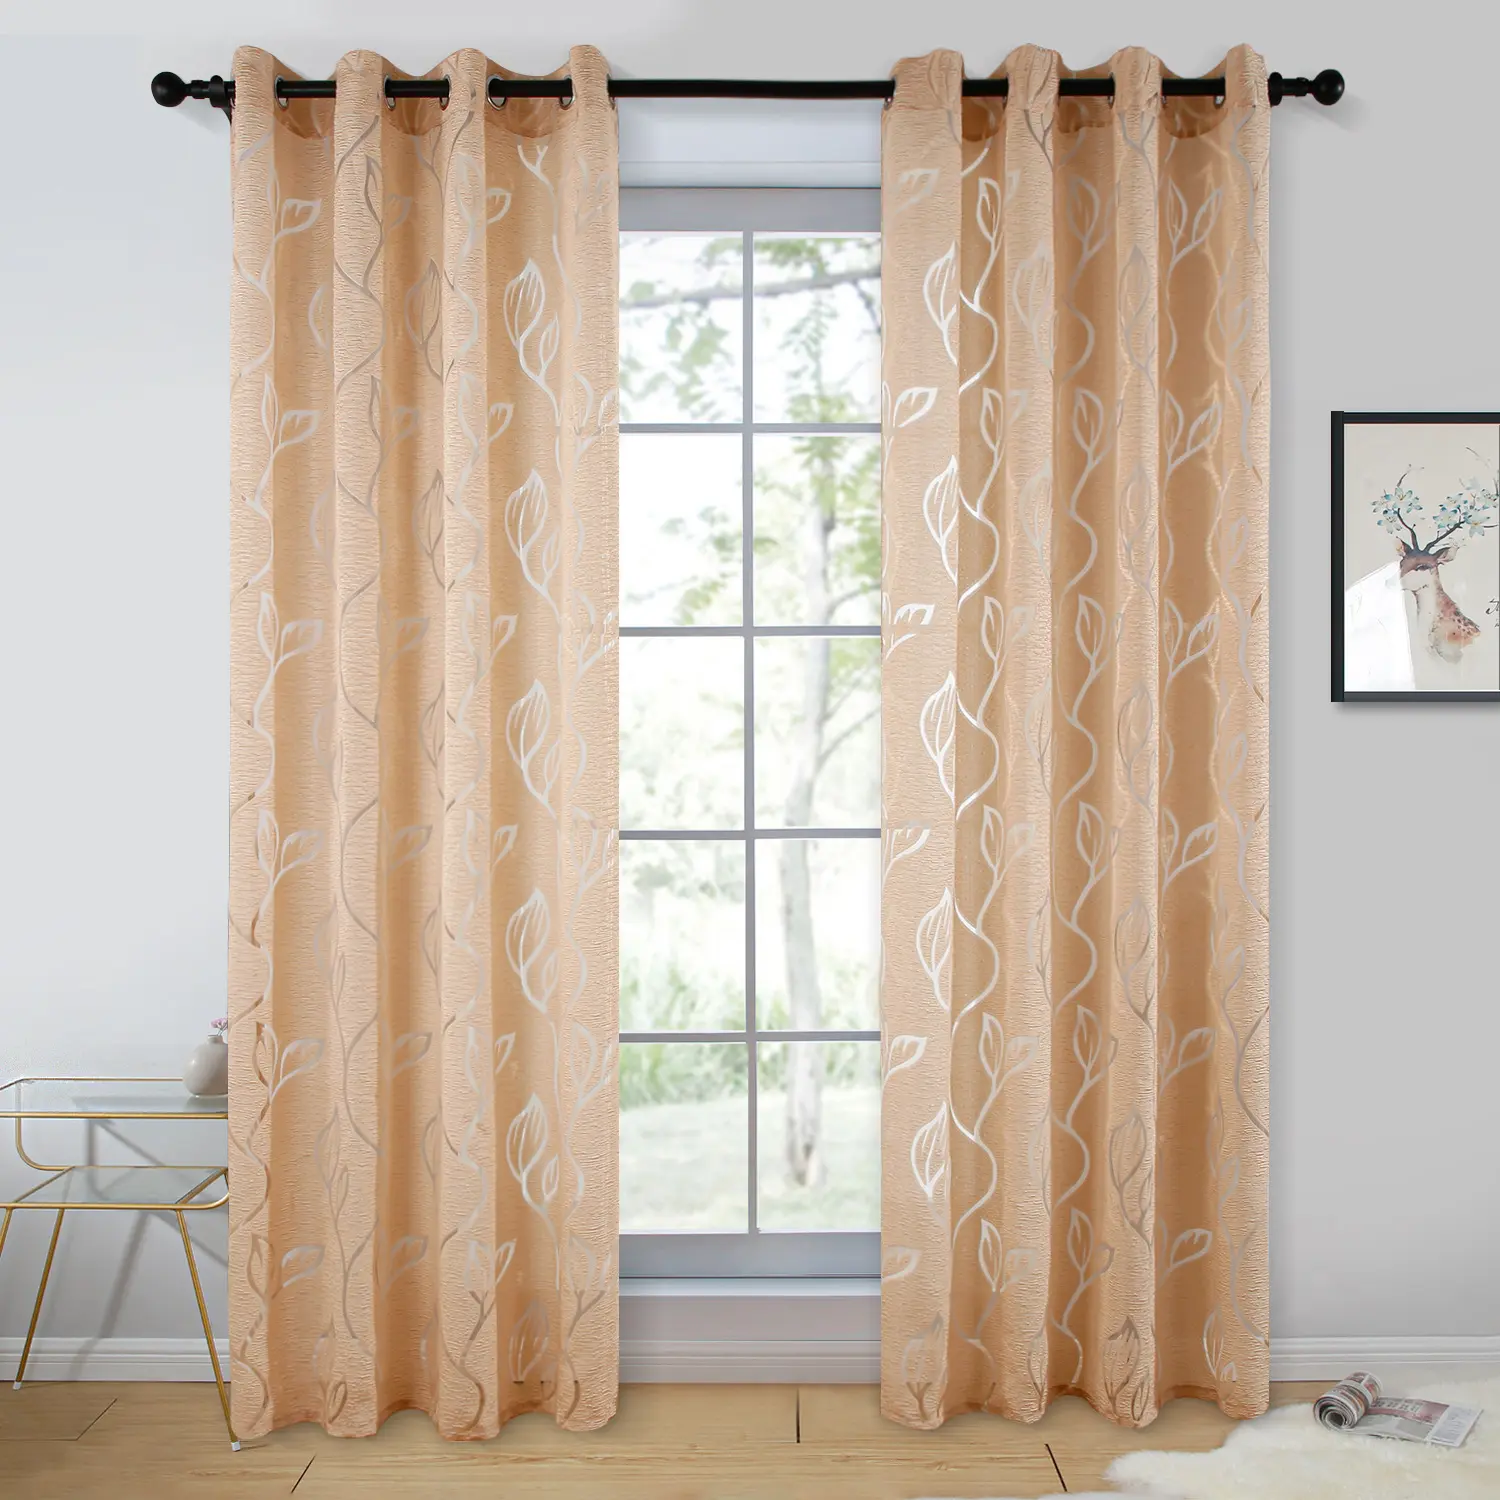 Hot Sale Morocco Style Design Simple Modern Leaves Rotten Flower Hotel Window Sheer Curtain